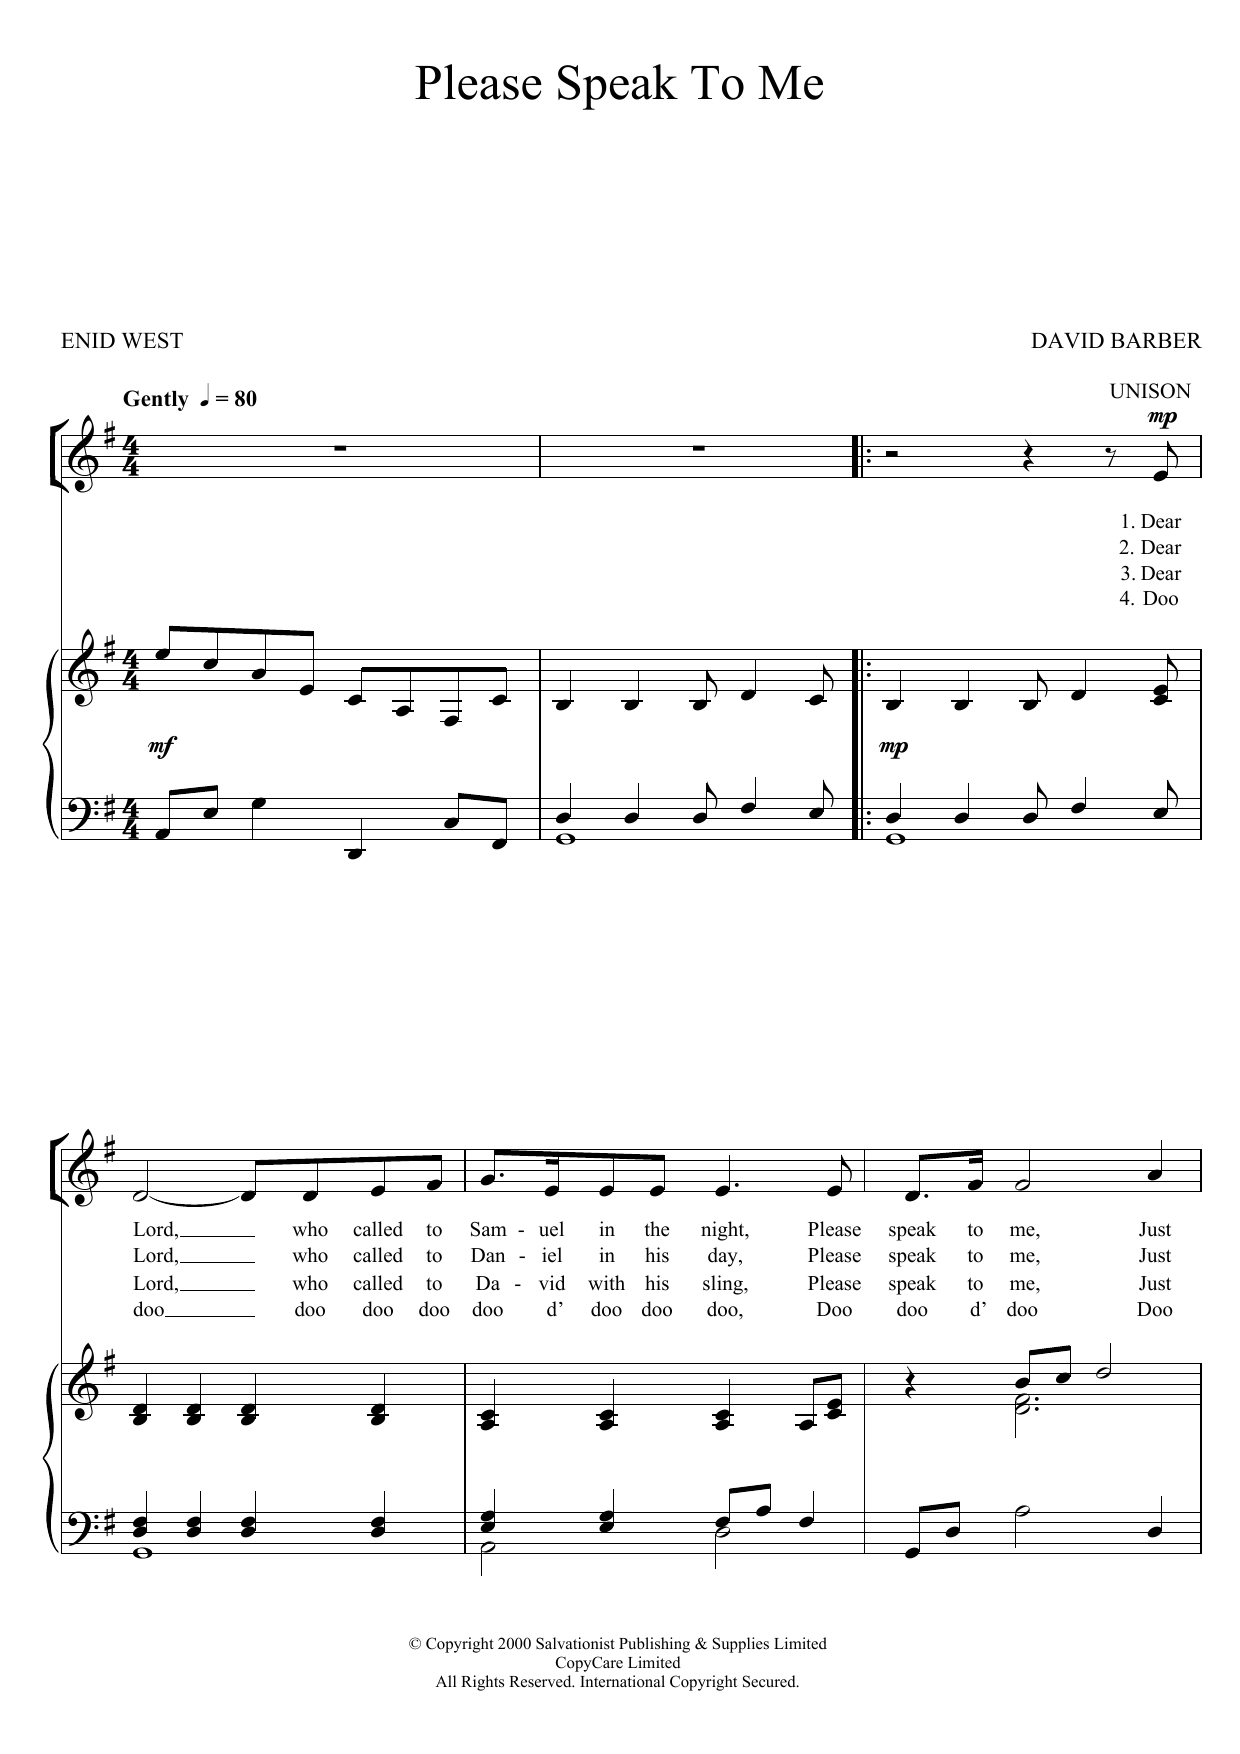 Download The Salvation Army Please Speak To Me Sheet Music